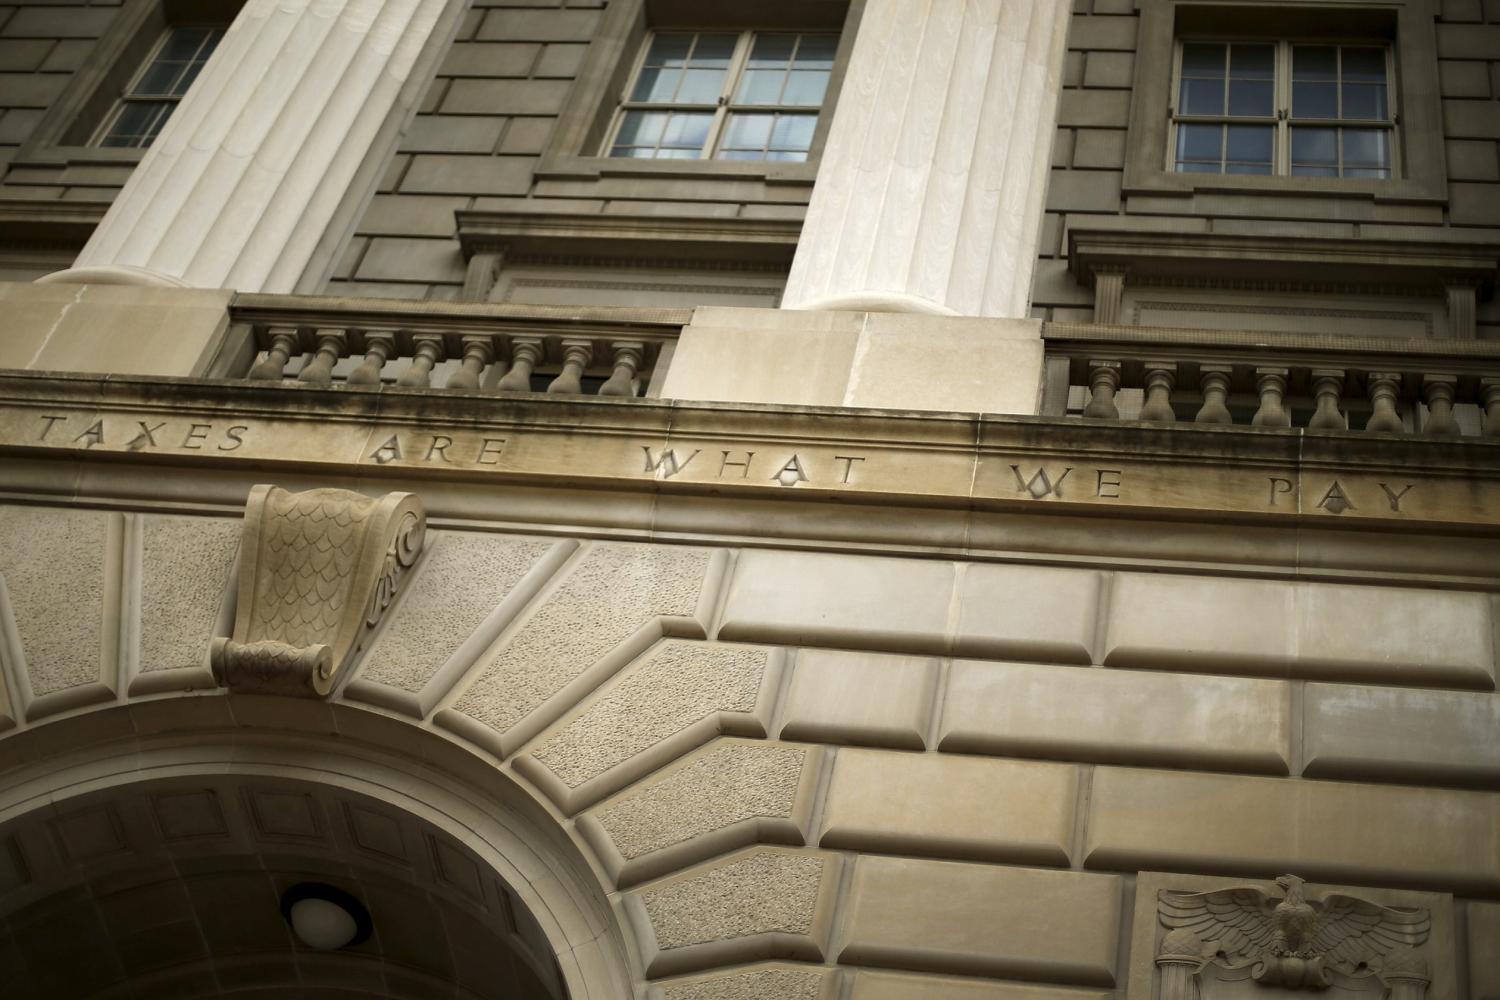 A general view of the U.S. Internal Revenue Service (IRS) building, with the partial quote "taxes are what we pay," in Washington May 27, 2015. Tax return information for about 100,000 U.S. taxpayers was illegally accessed by cyber criminals over the past four months, U.S. IRS Commissioner John Koskinen said on Tuesday, the latest in a series of data thefts that have alarmed American consumers. The entire quote chiseled on the building, from Oliver Wendell Holmes, reads, "Taxes are what we pay for a civilized society''. REUTERS/Jonathan Ernst - RTX1EU9N